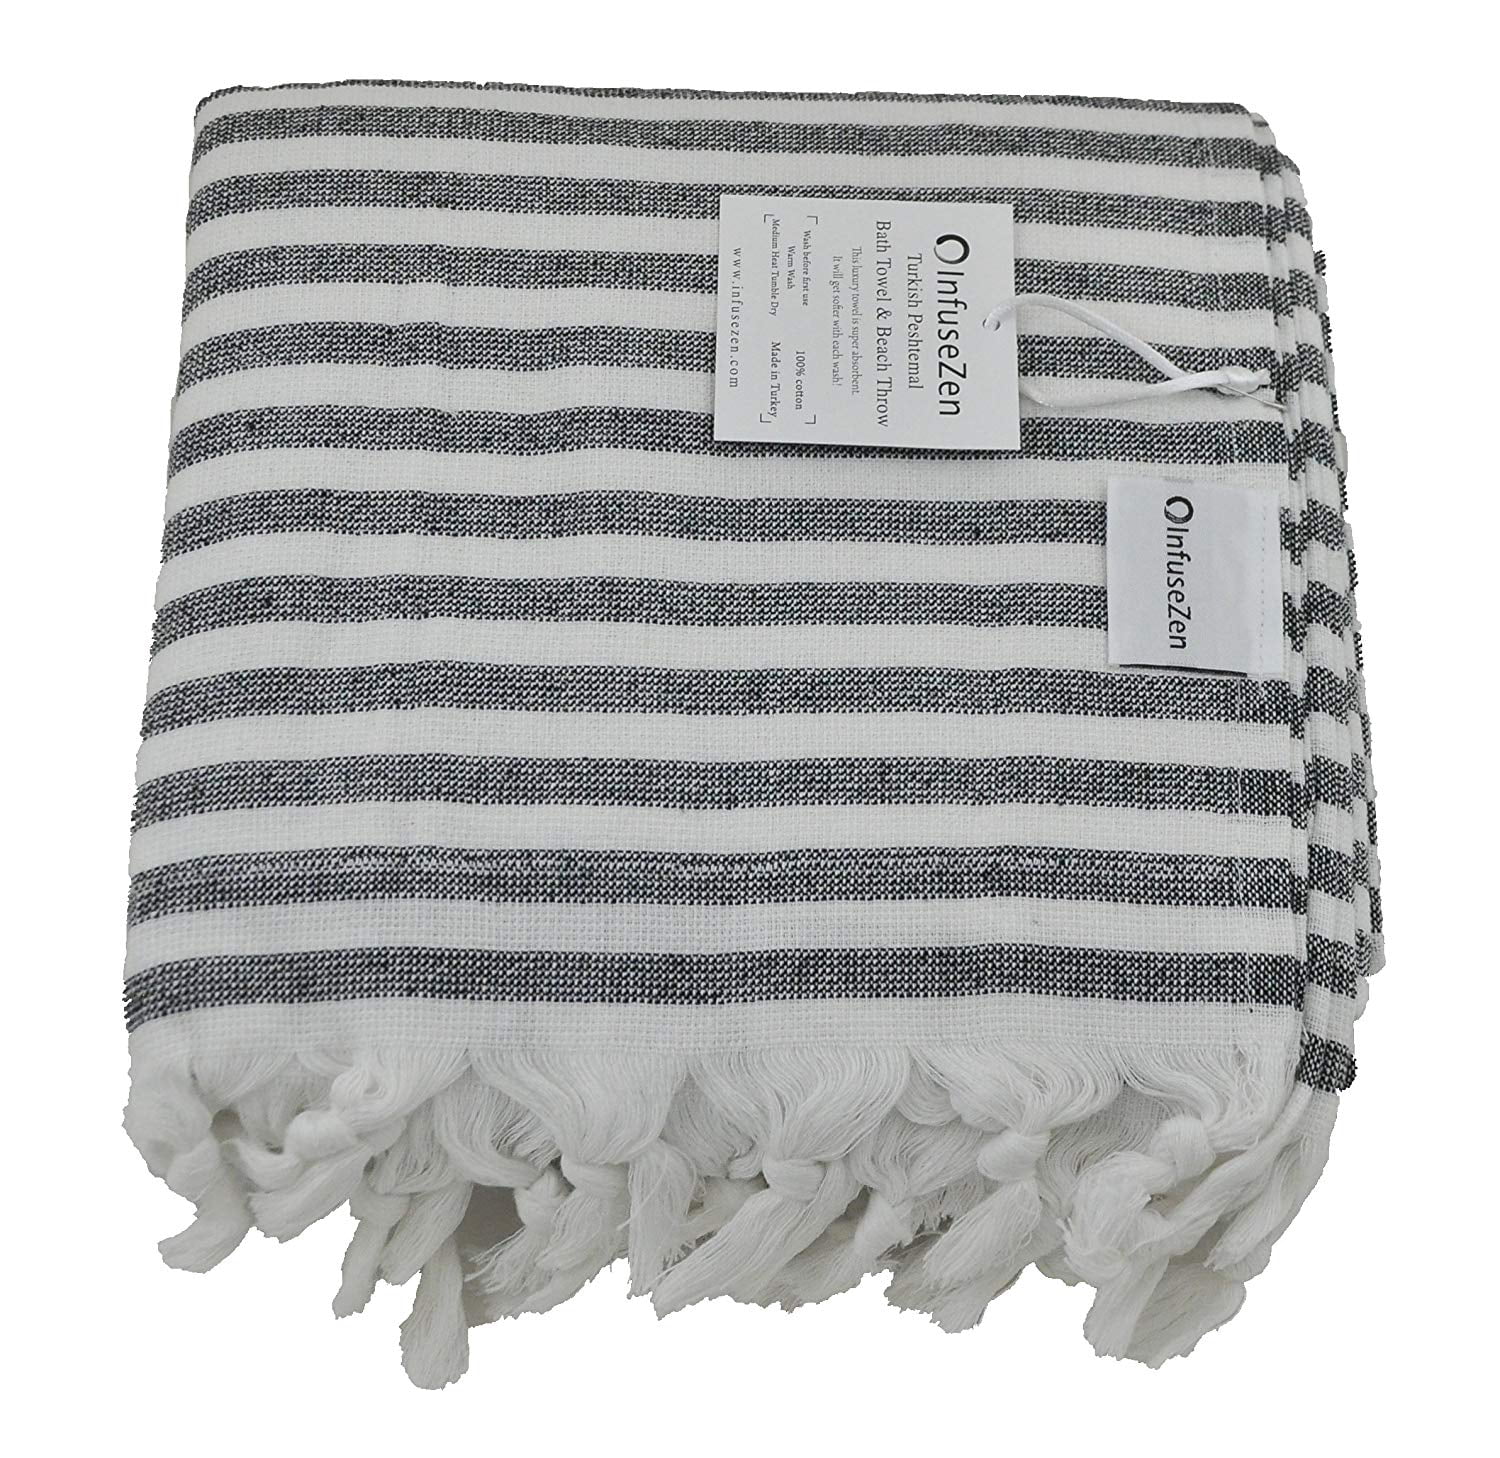 Striped Peshtemal for The Bath 100% Turkish Cotton Beige InfuseZen Thin Turkish Towel with Soft Terry Cloth on One Side Pool or Beach Luxury Terry Back Fouta